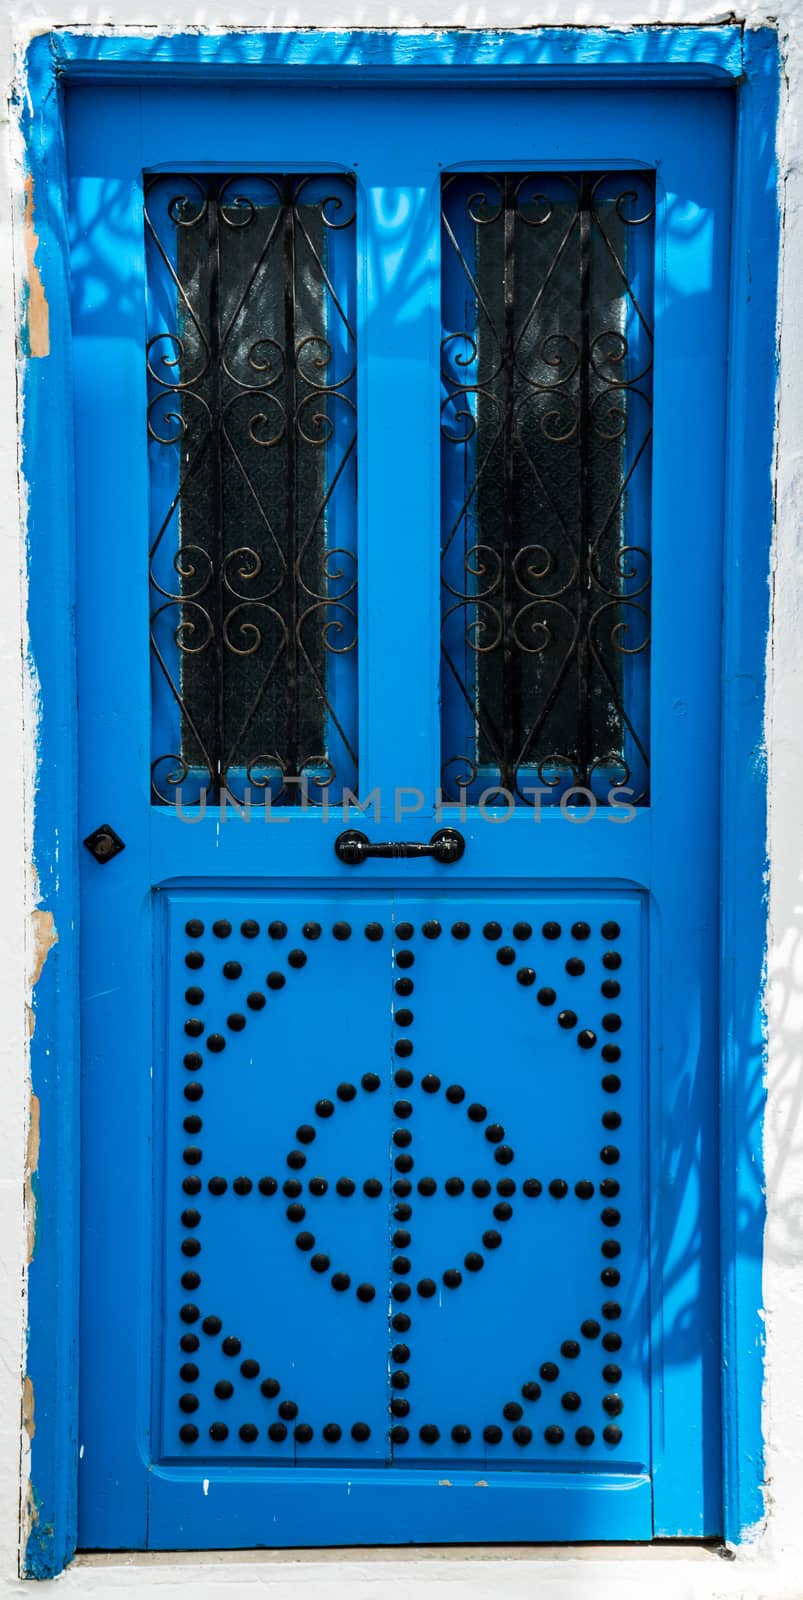 Blue door with ornament as symbol of Sidi Bou Said in Tunisia. Large resolution